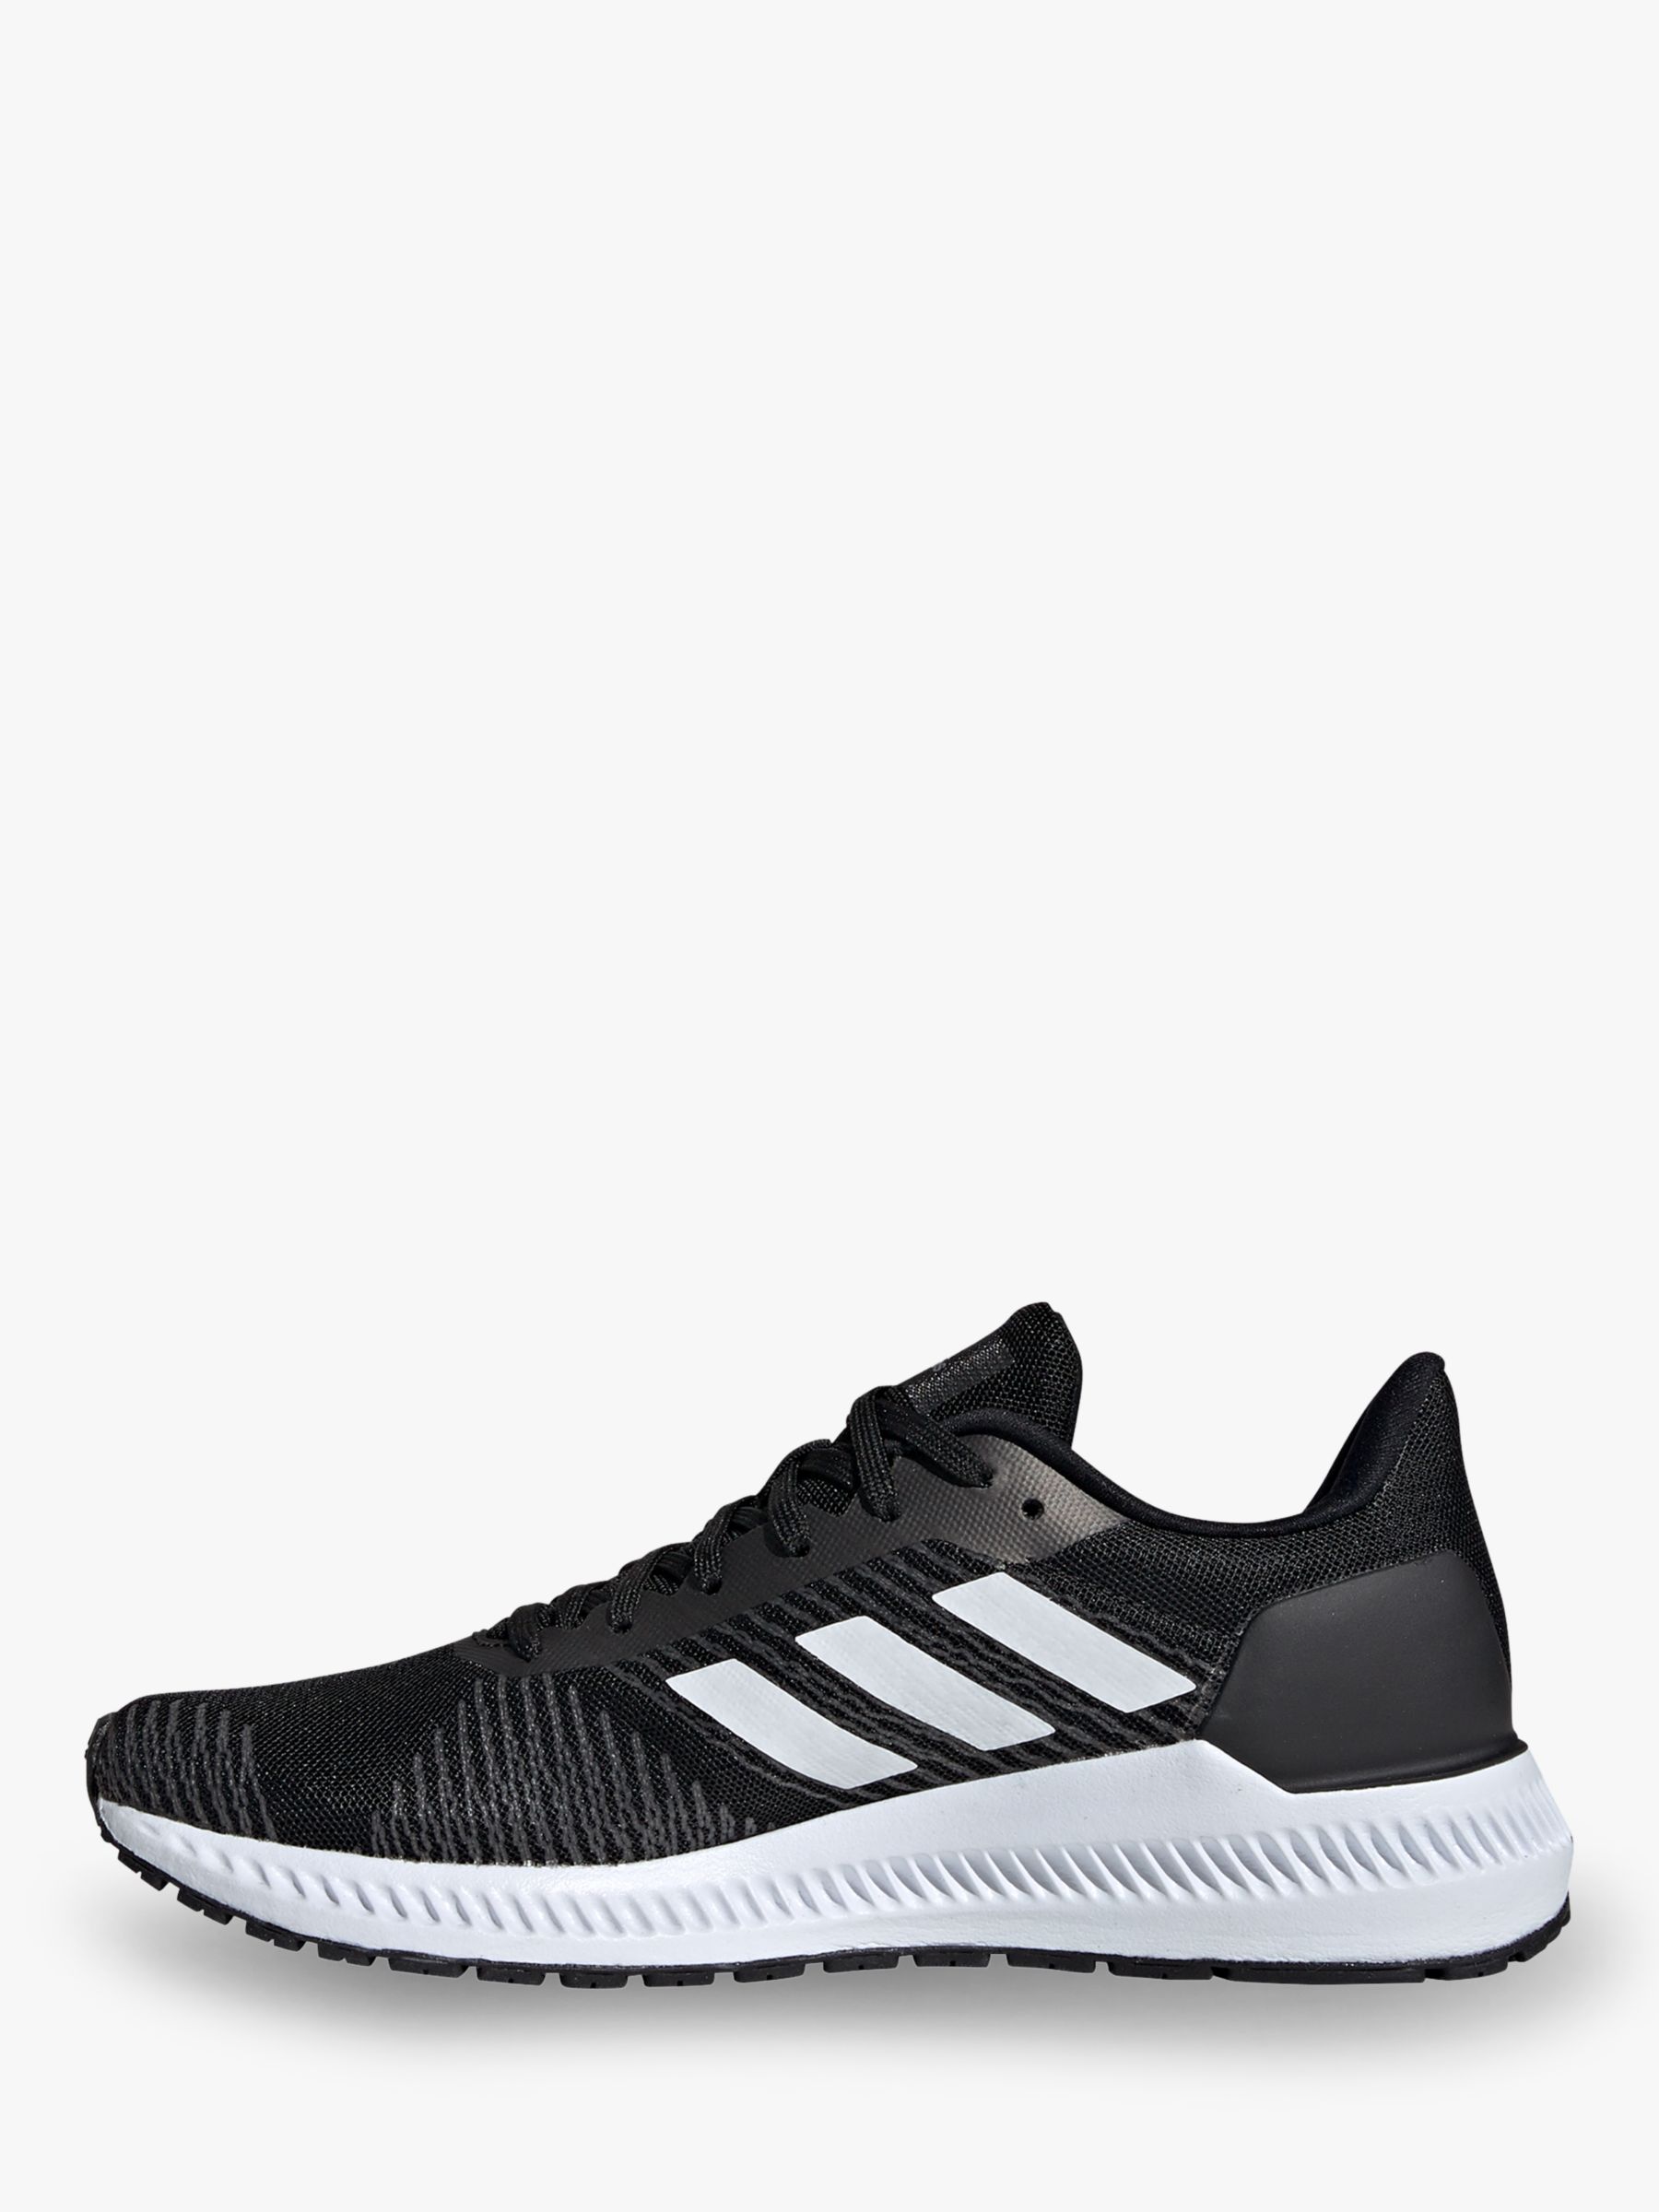 black and white adidas running shoes womens